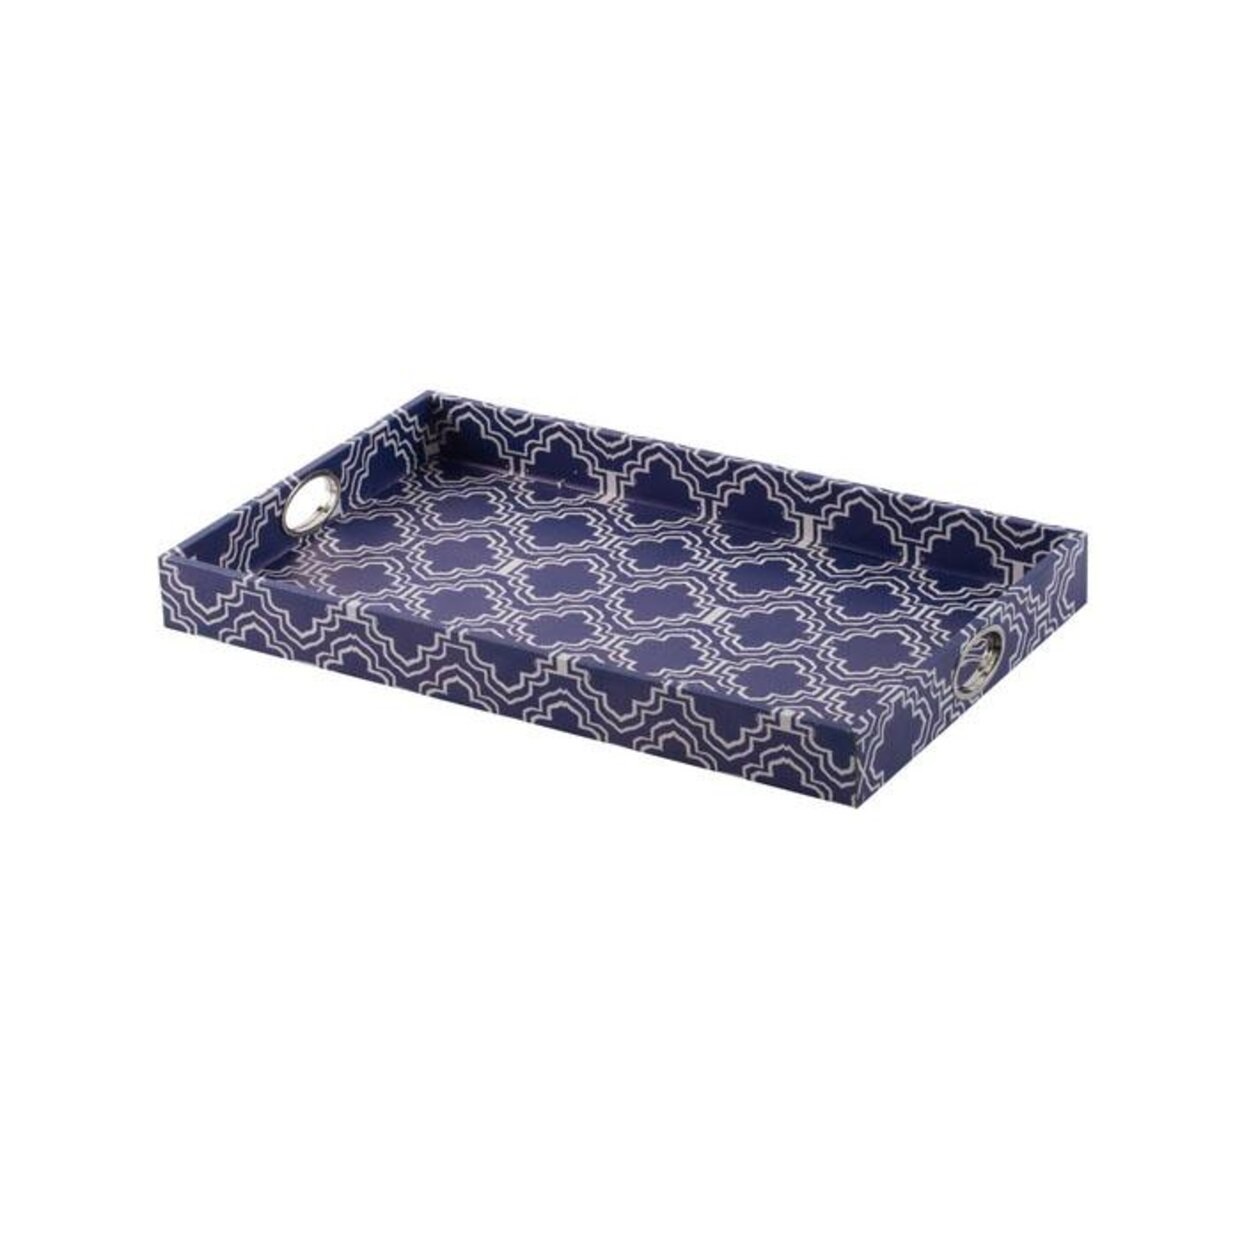 Ikat Blue & White Tray – C'estbien Collection